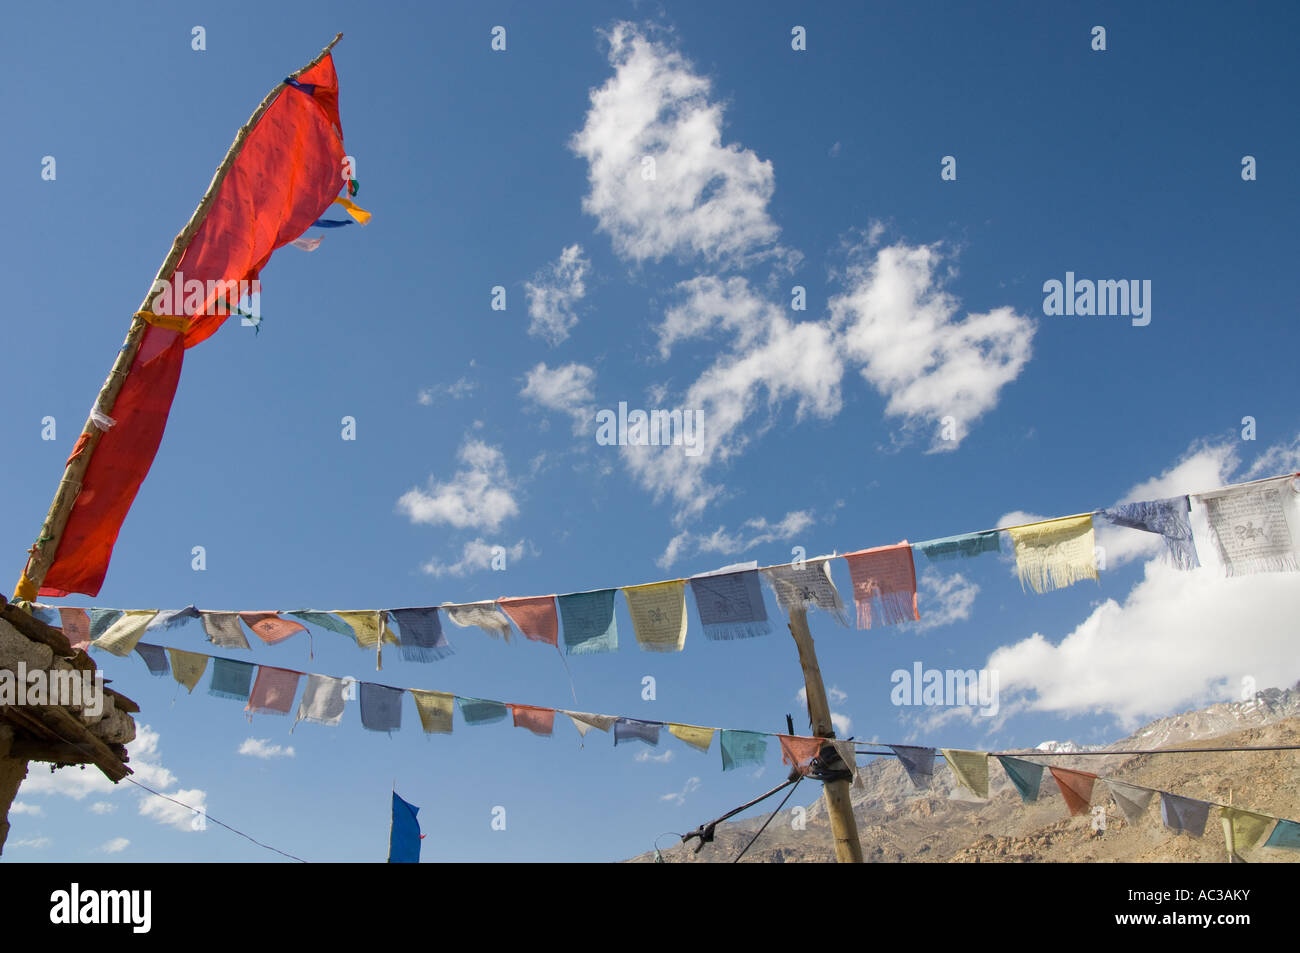 India Himachal Pradesh Spiti Nako village 2950m close up of traditional prayer flags with light white clud in blue sky Stock Photo